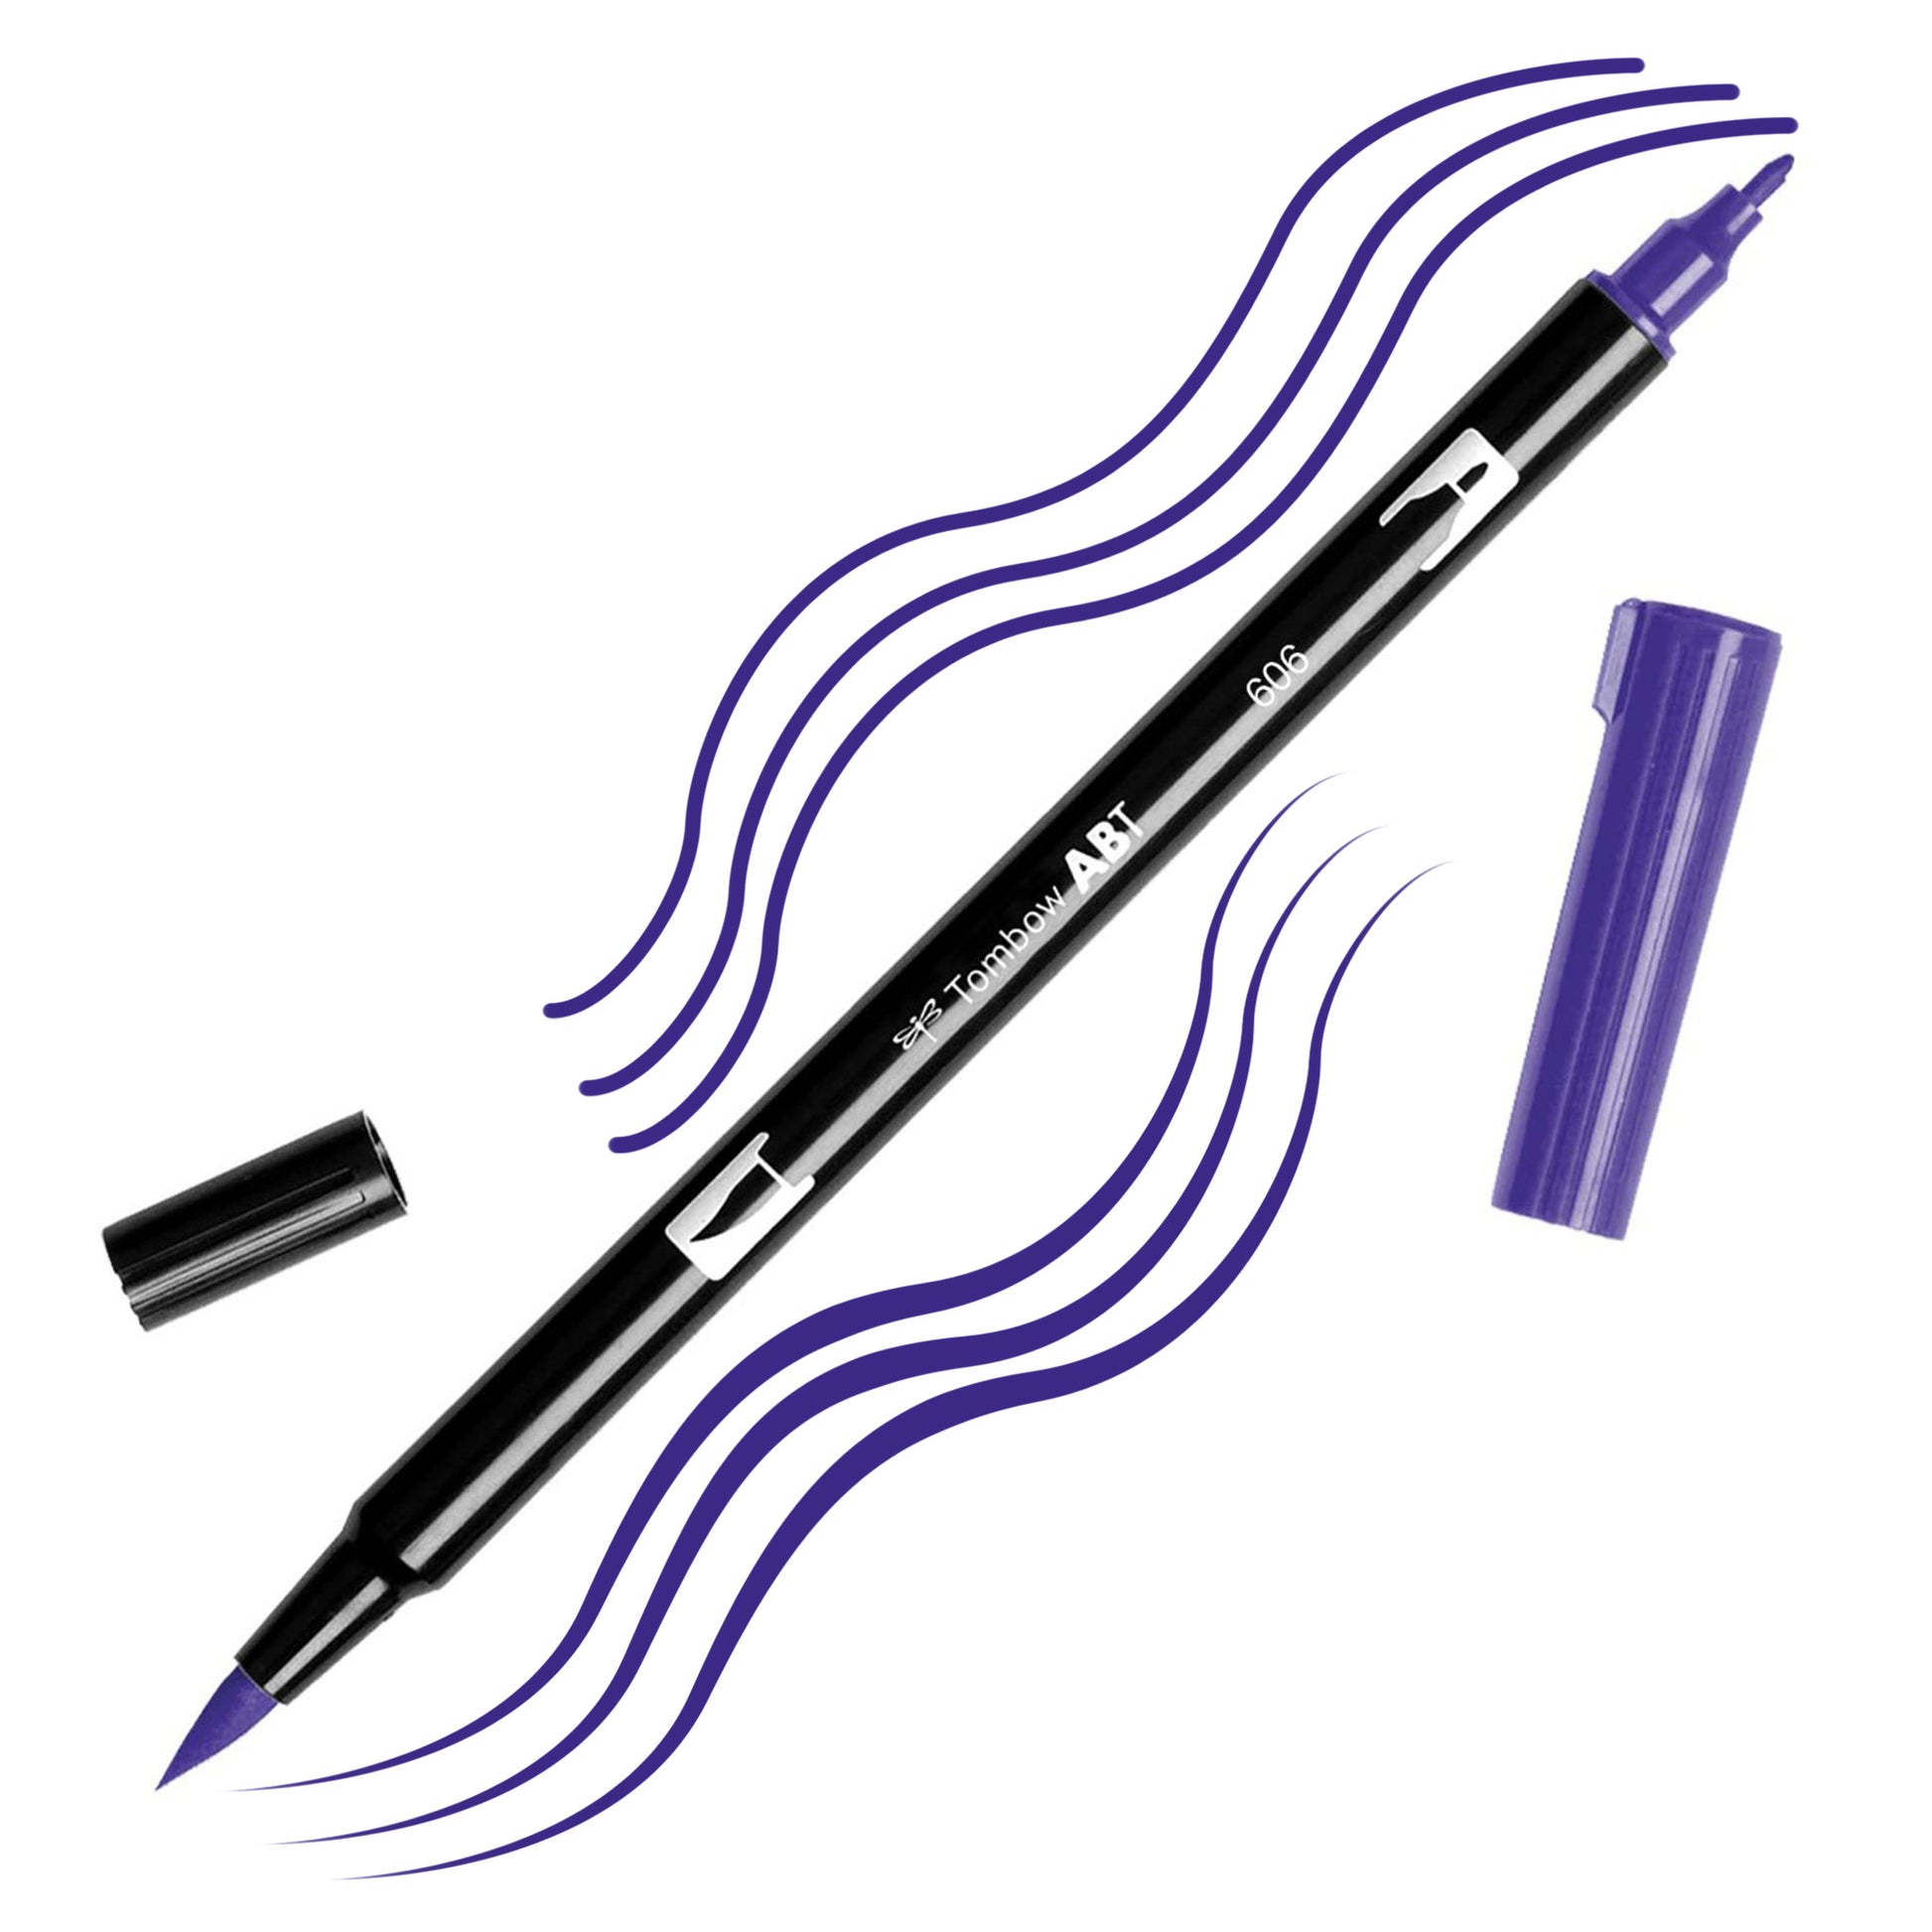 Violet Tombow double-headed brush-pen with a flexible nylon fiber brush tip and a fine tip against a white background with Violet strokes